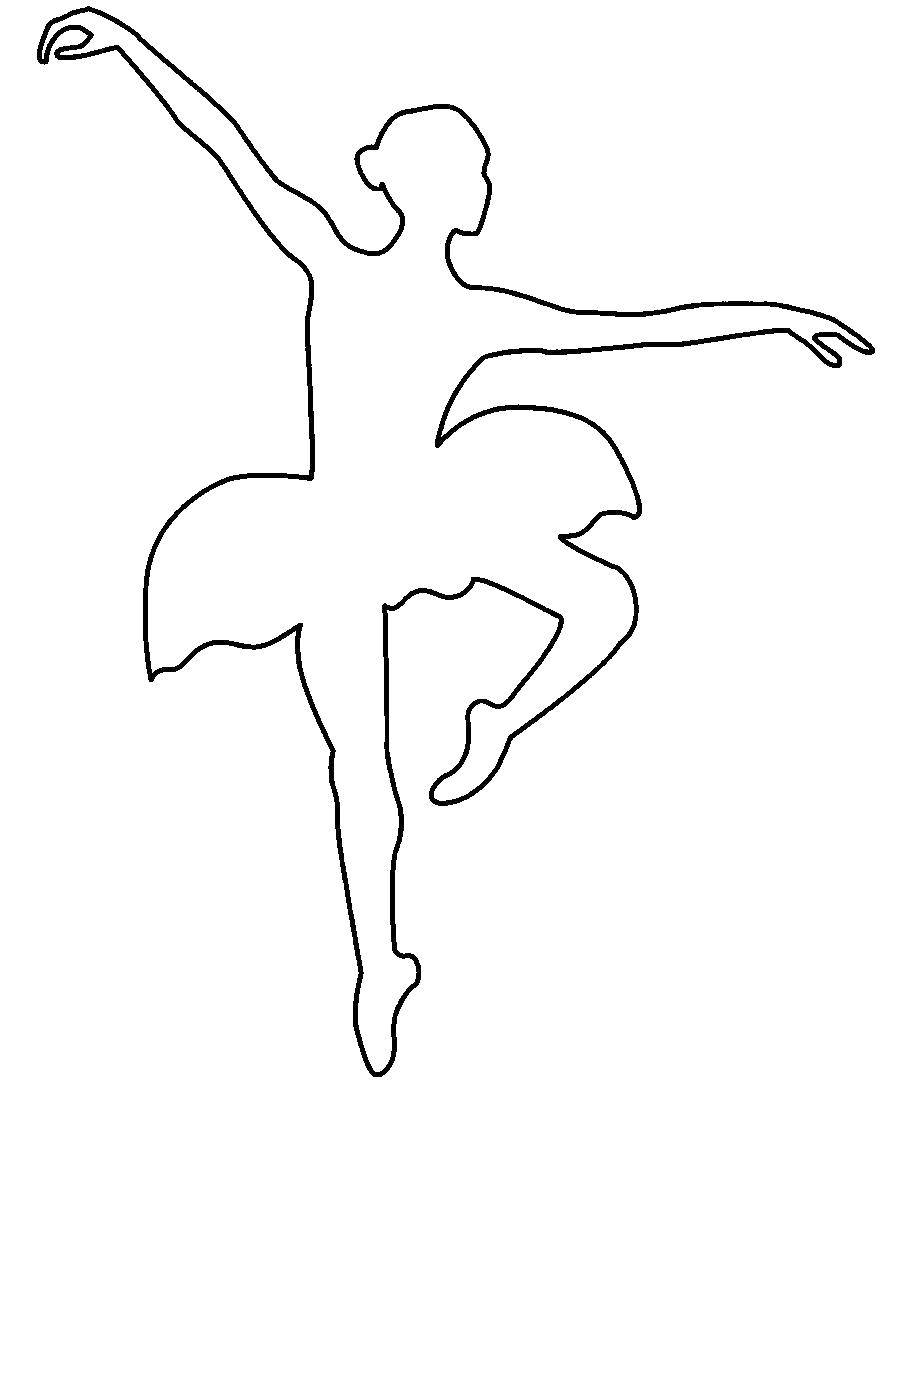 Coloring The outline of the ballerina. Category ballerina. Tags:  Ballerina, ballet.